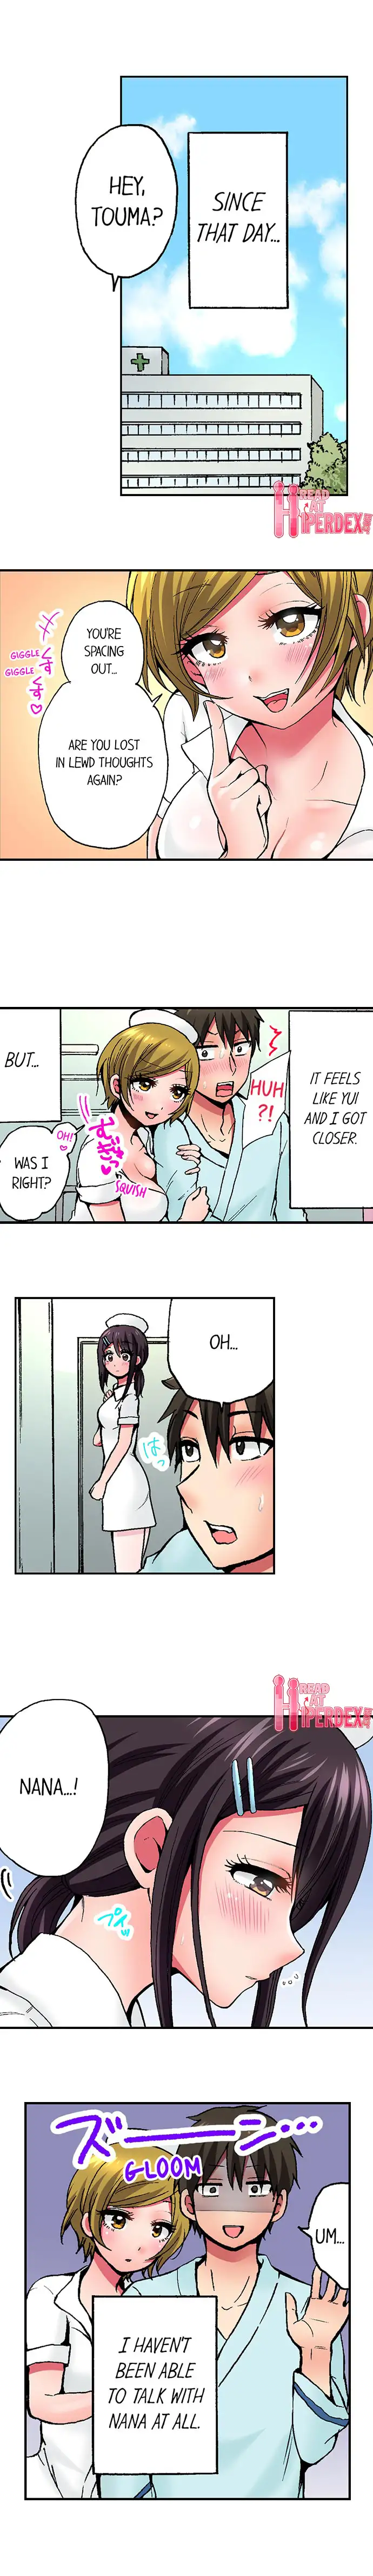 Pranking the Working Nurse - Chapter 7 Page 2